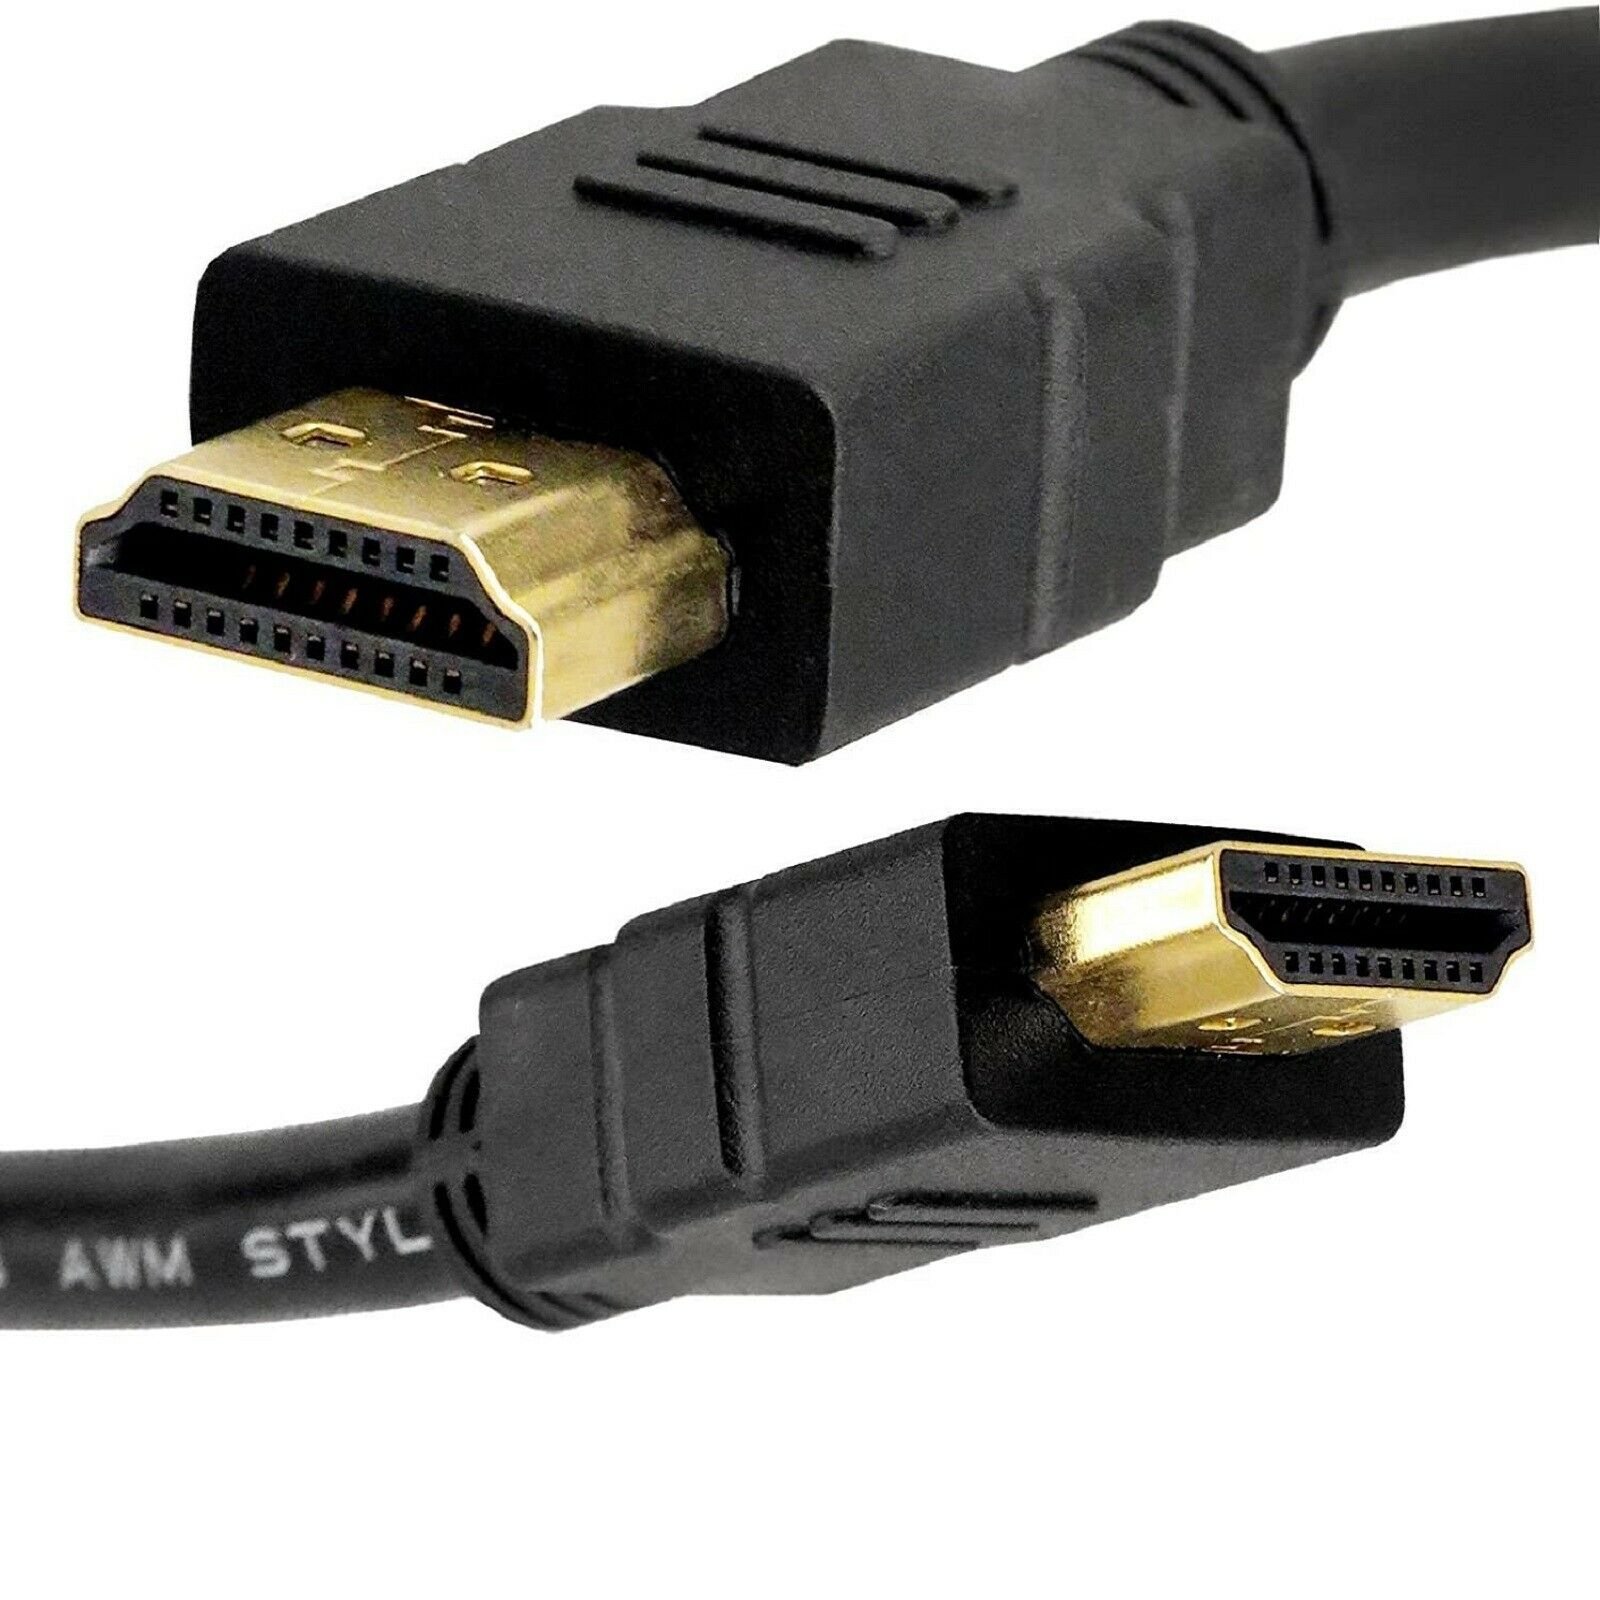 connect laptop to projector through hdmi cable